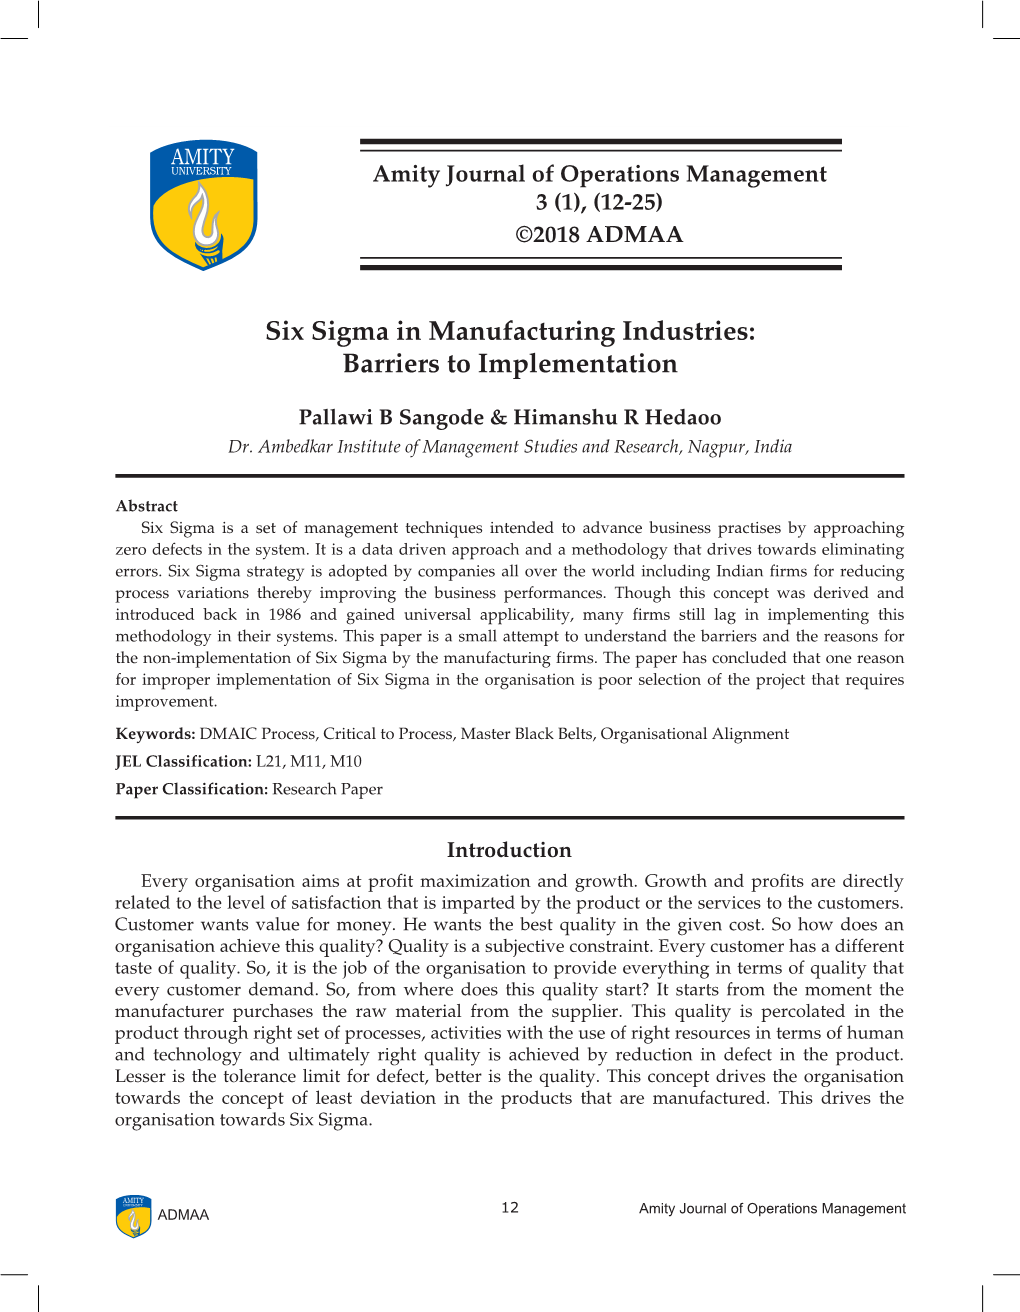 Six Sigma in Manufacturing Industries: Barriers to Implementation